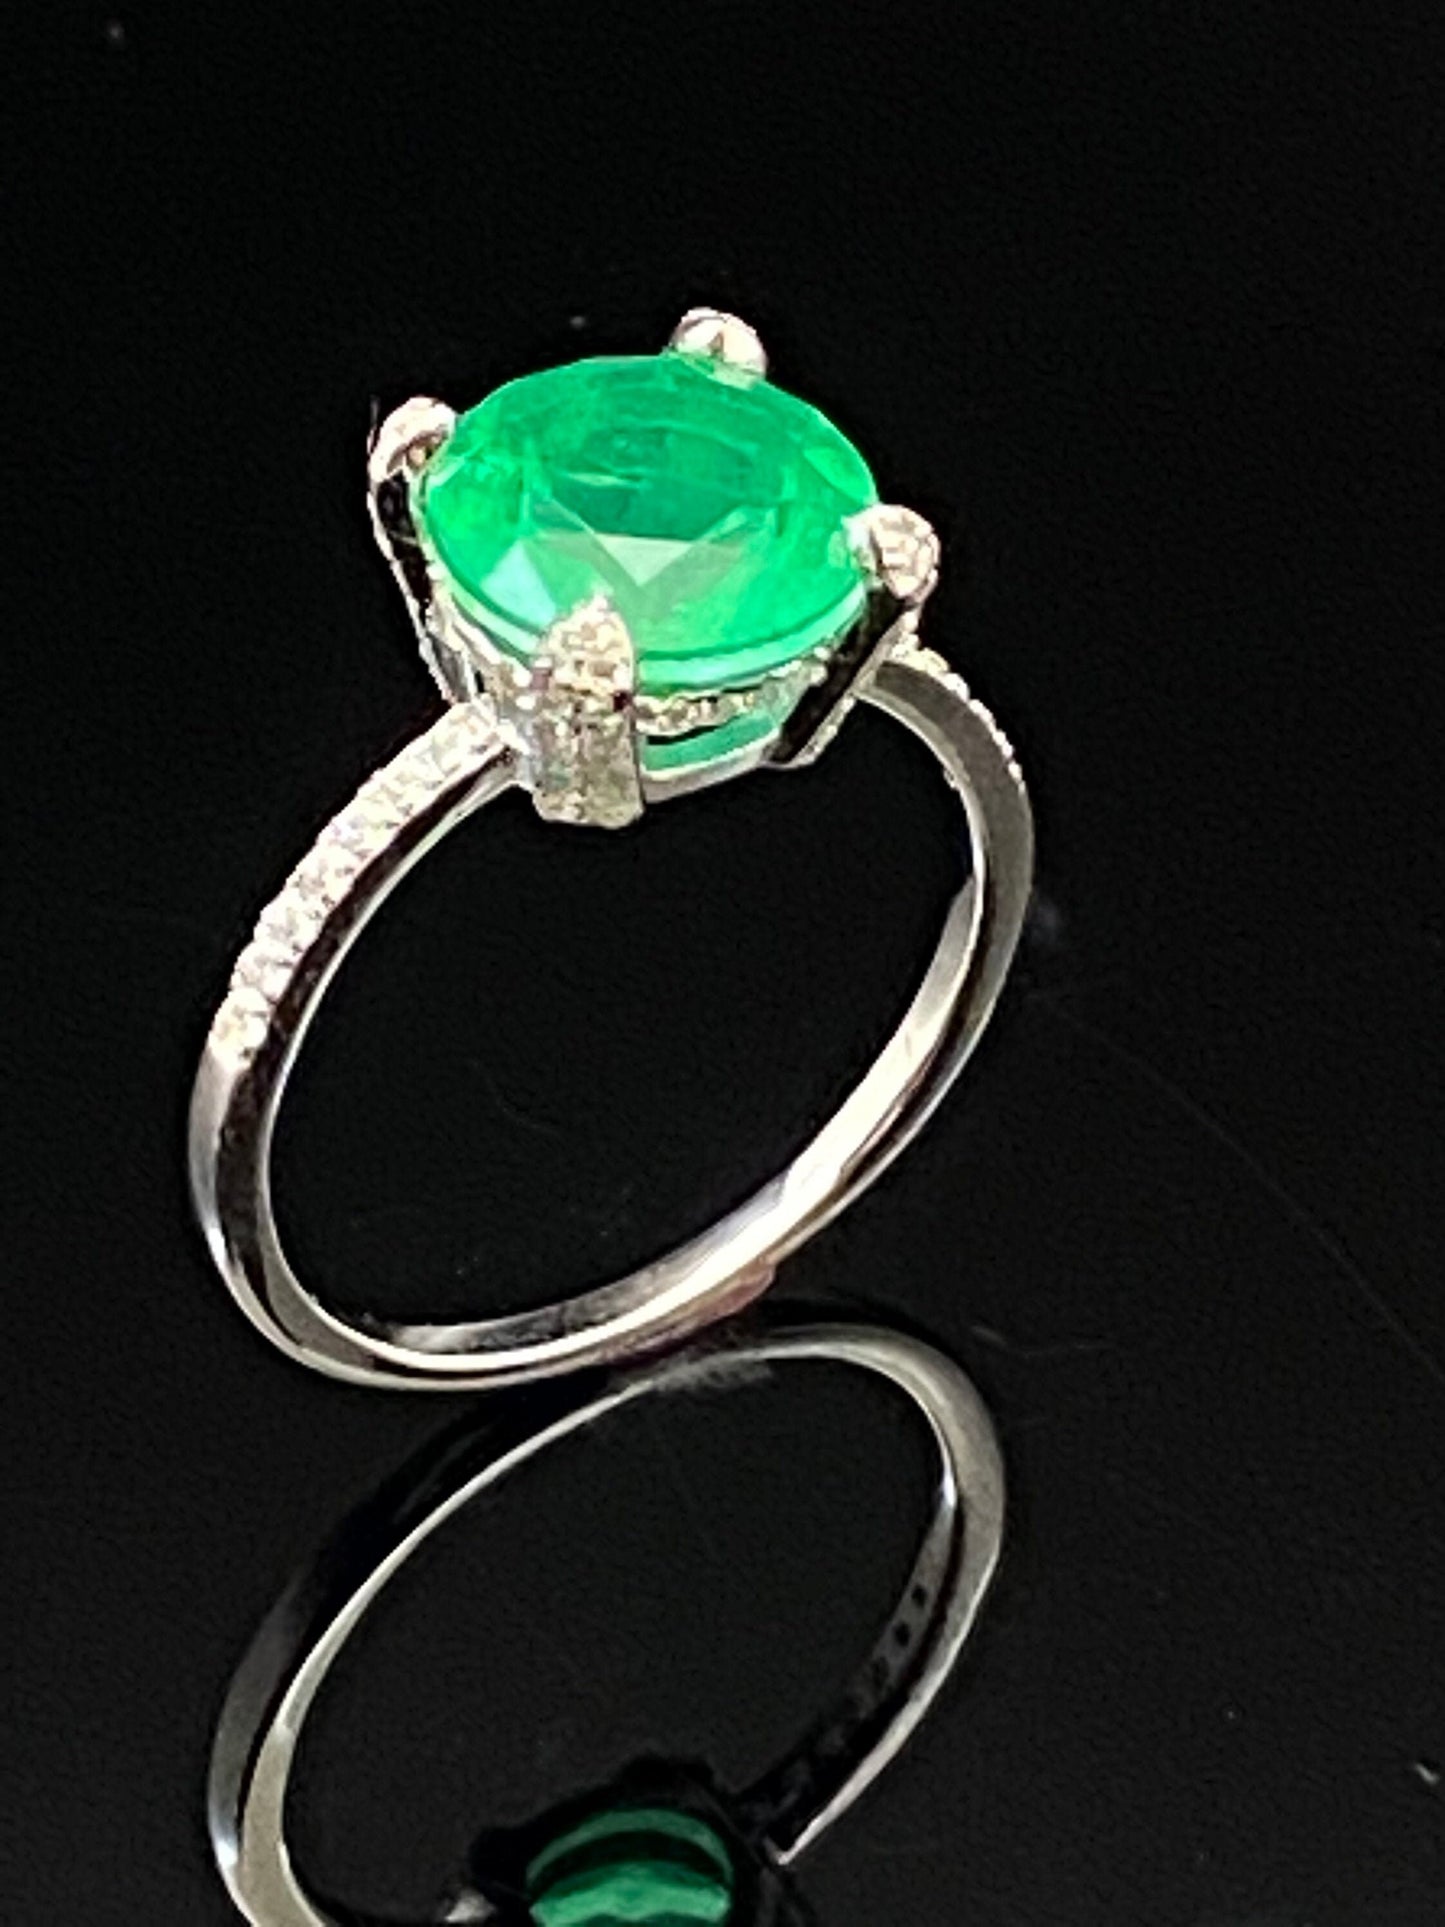 White Gold Over Sterling Silver Pave Solitaire Engagement Emerald CZ Ring